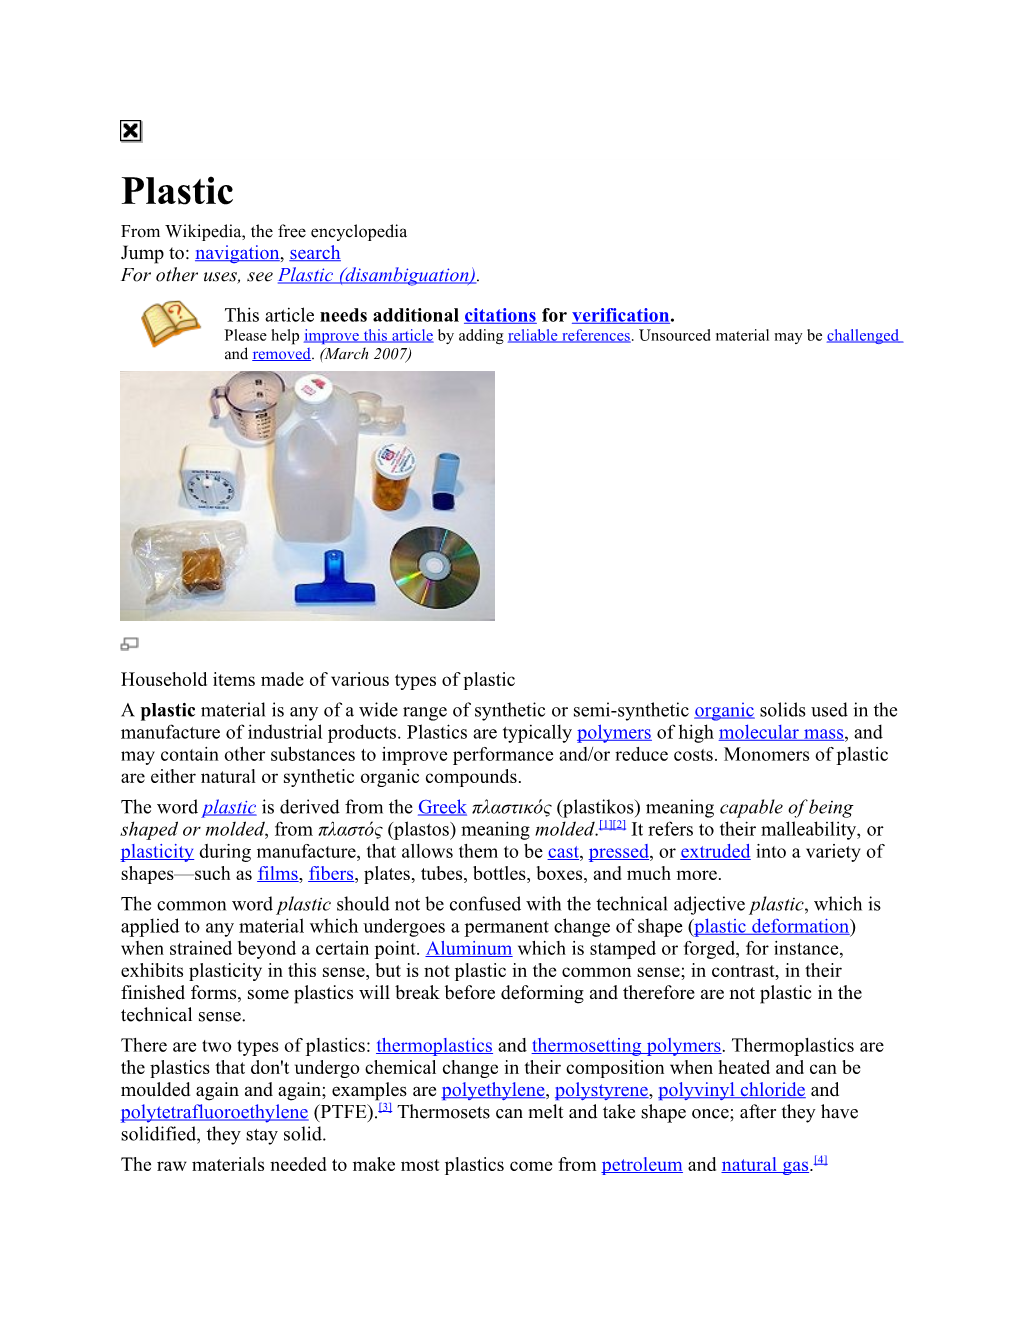 Plastic Recycling Programs Were Common in the United States and Elsewhere